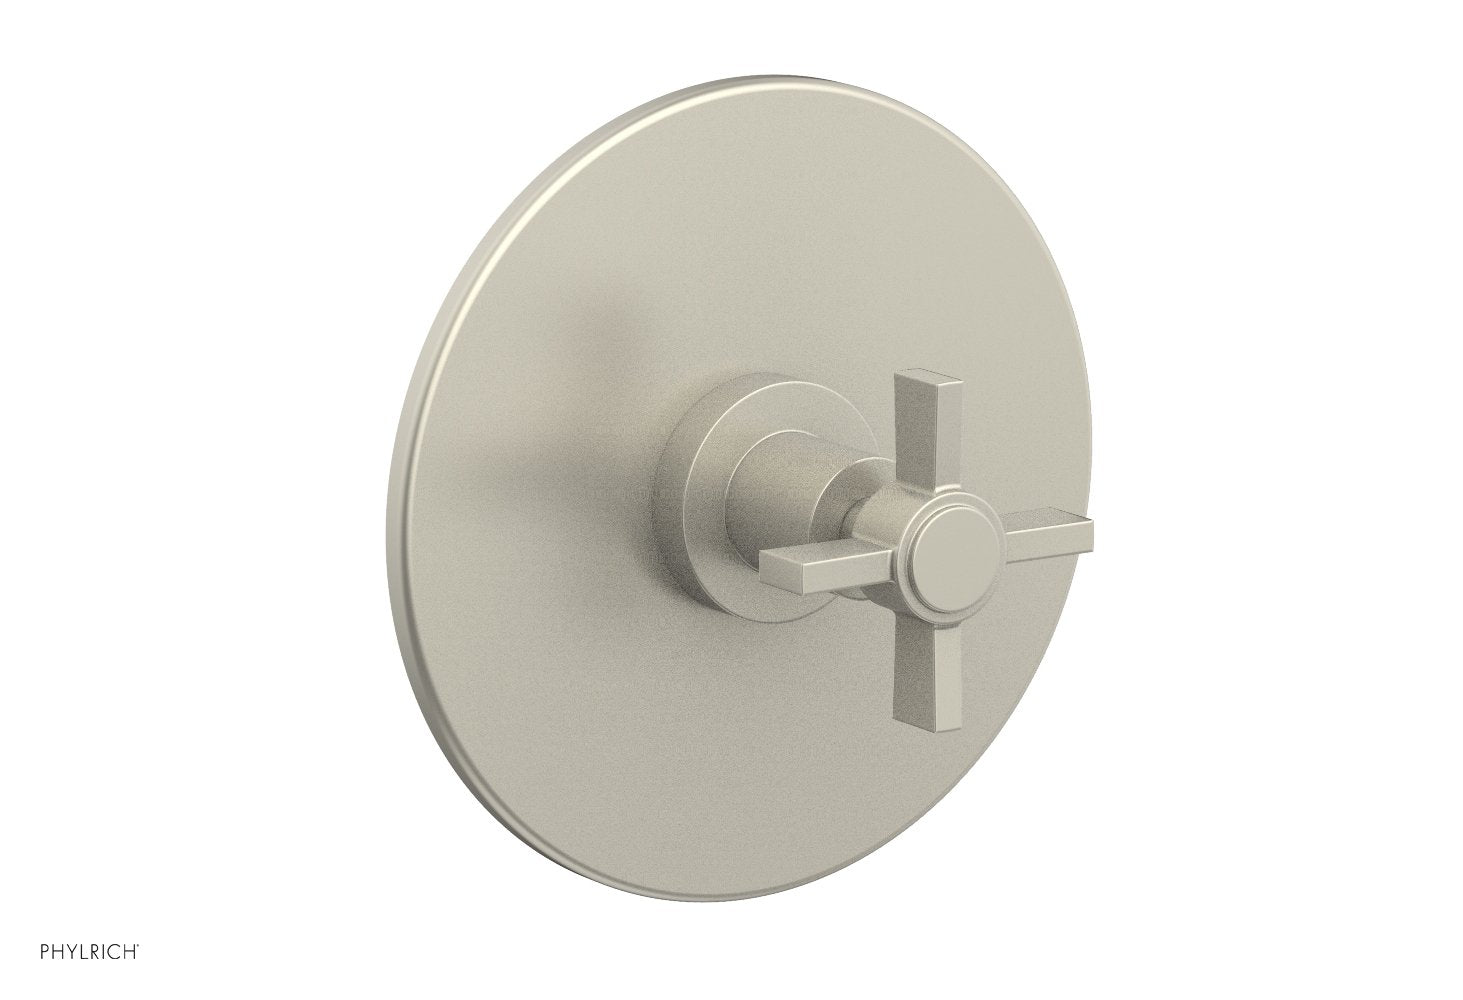 Phylrich BASIC 1/2" Thermostatic Shower Trim - Blade Cross Handle